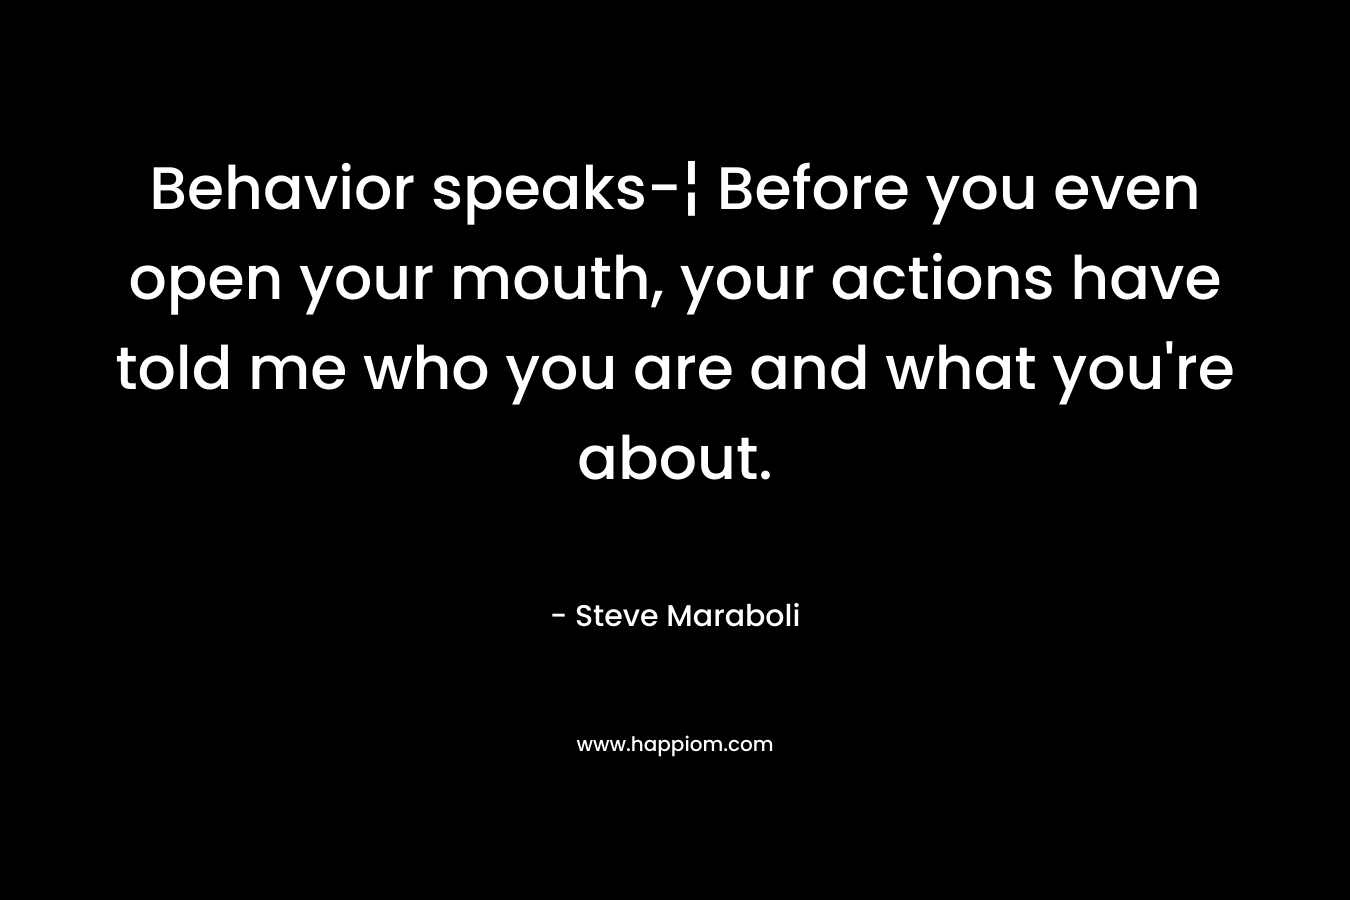 Behavior speaks-¦ Before you even open your mouth, your actions have told me who you are and what you’re about. – Steve Maraboli